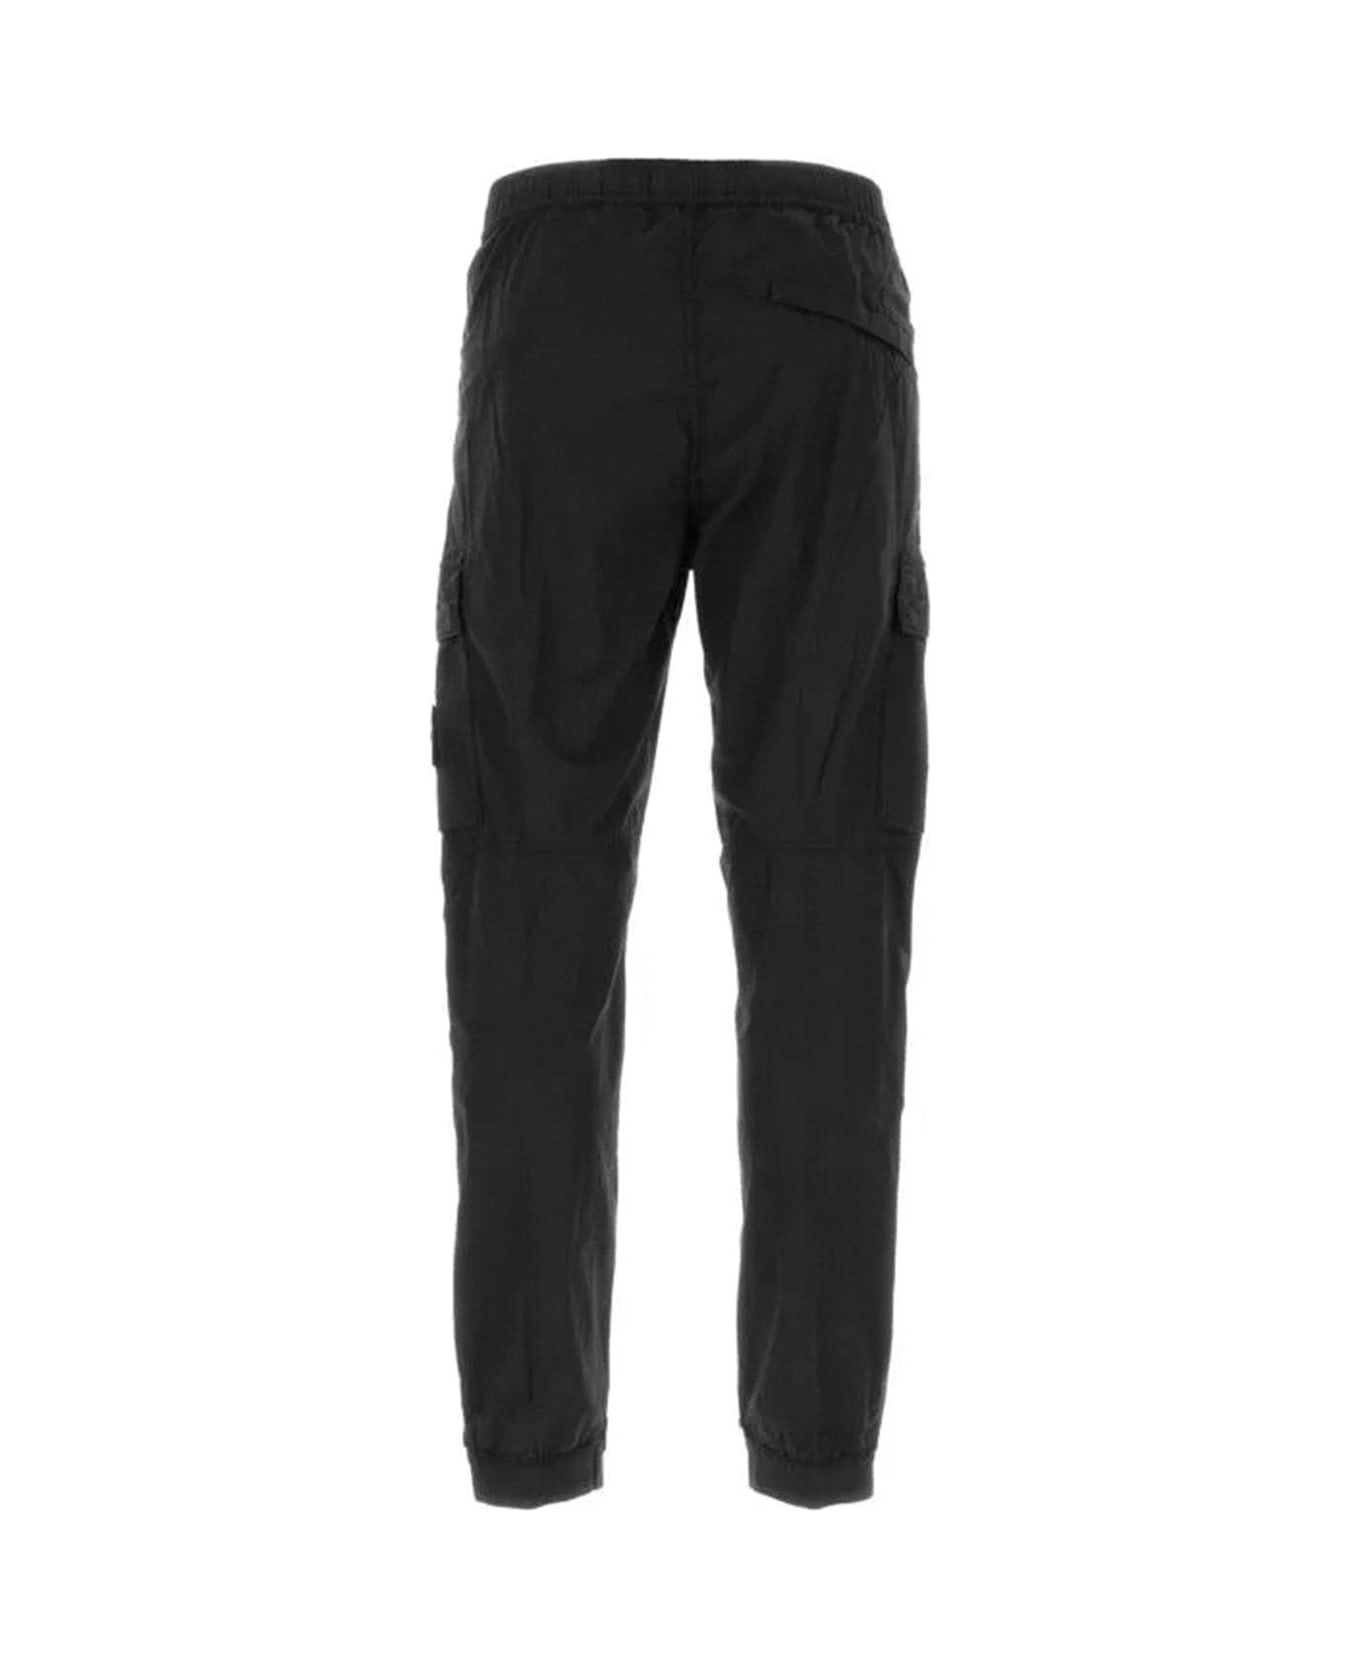 Stone Island Compass Patch Elasticated Waist Cargo Trousers